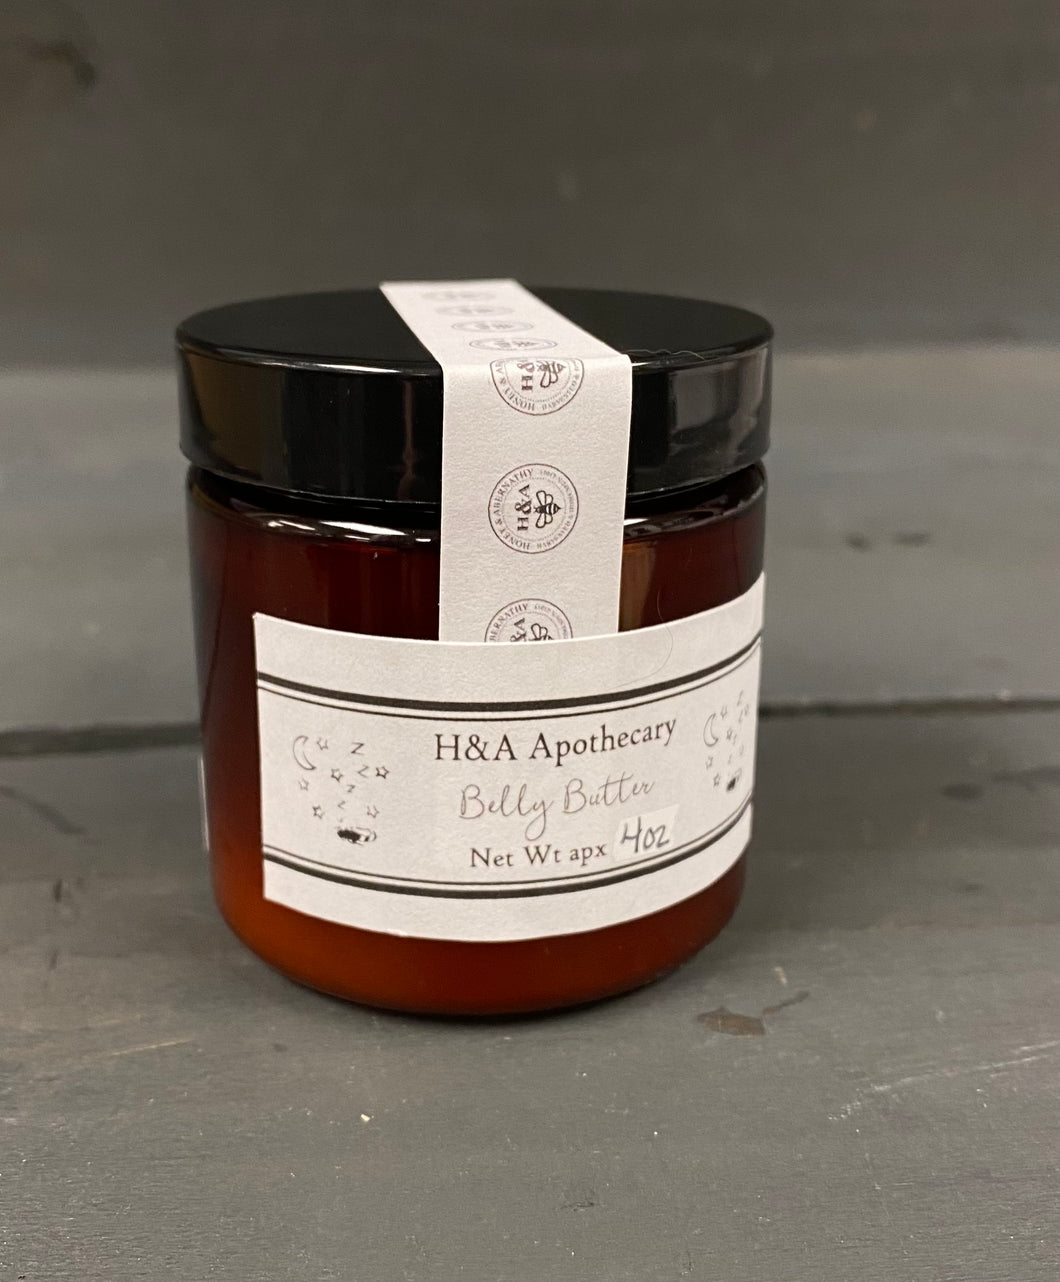 H&A Apothecary Belly Butter